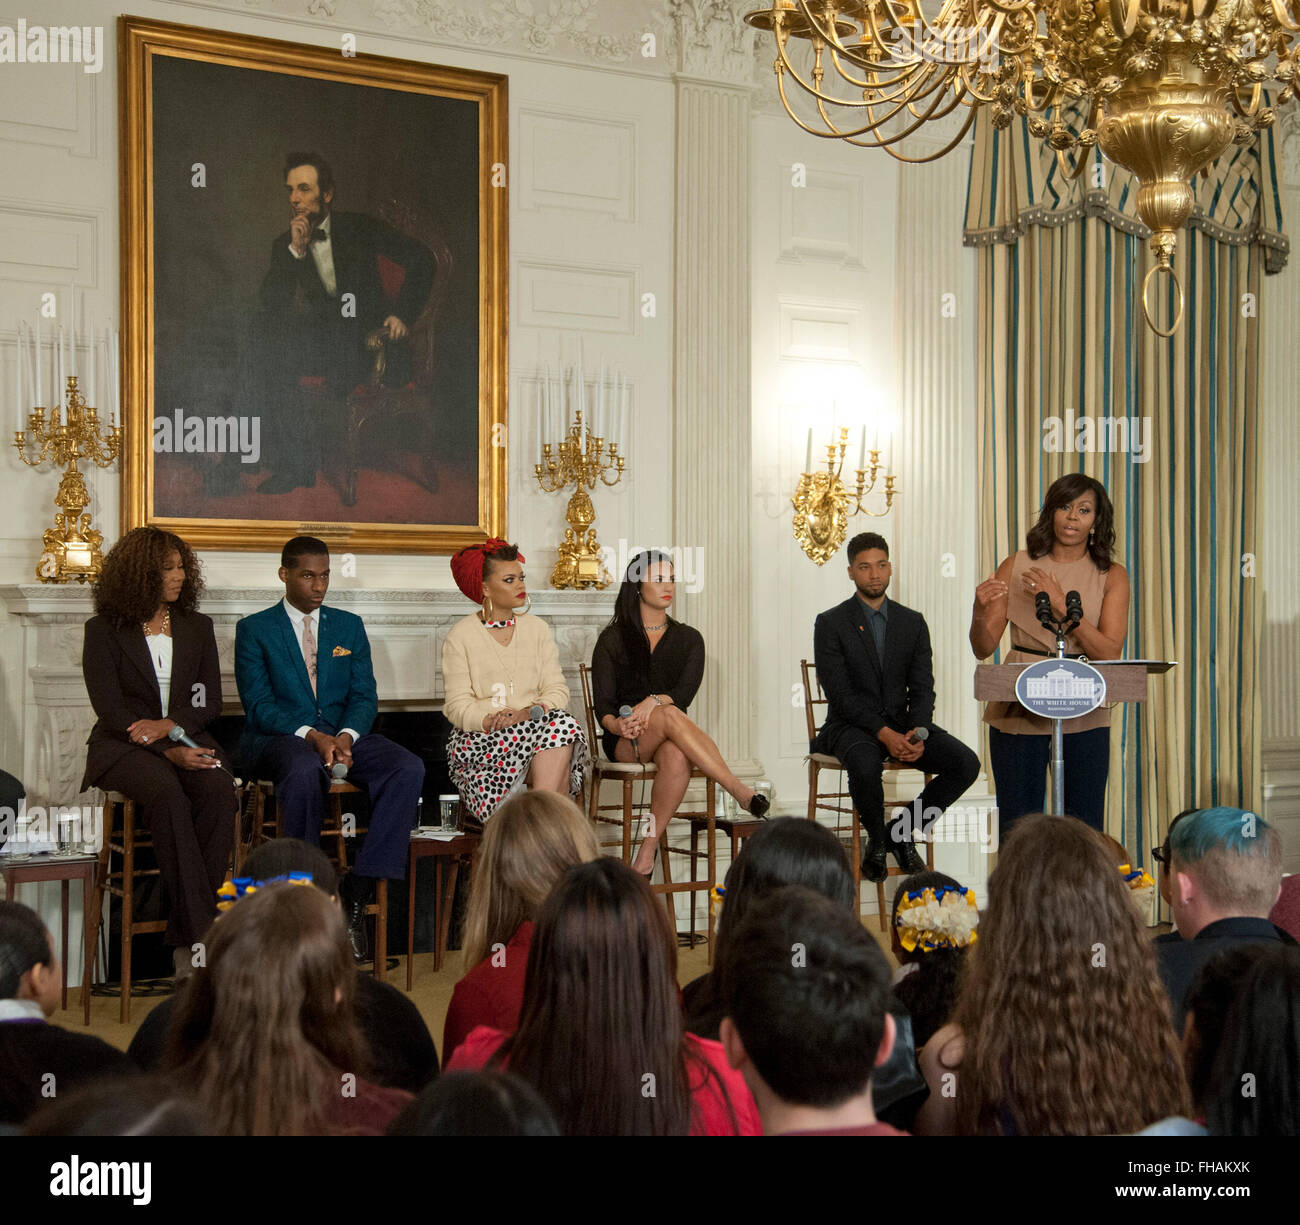 Washington DC, USA. 24th February, 2016.As part of the “In Performance at the White House” series,  the First Lady hosts a special daytime workshop for students. The First Lady will welcome more than 130 middle school, high school and college students from across the country to take part in an interactive student workshop: “The Musical Legacy of Ray Charles.”She was joined by Yolanda Adams, Leon Bridges, Audra Day, Demi Lavato and Jussie Smollett Credit:  Patsy Lynch/Alamy Live News Stock Photo